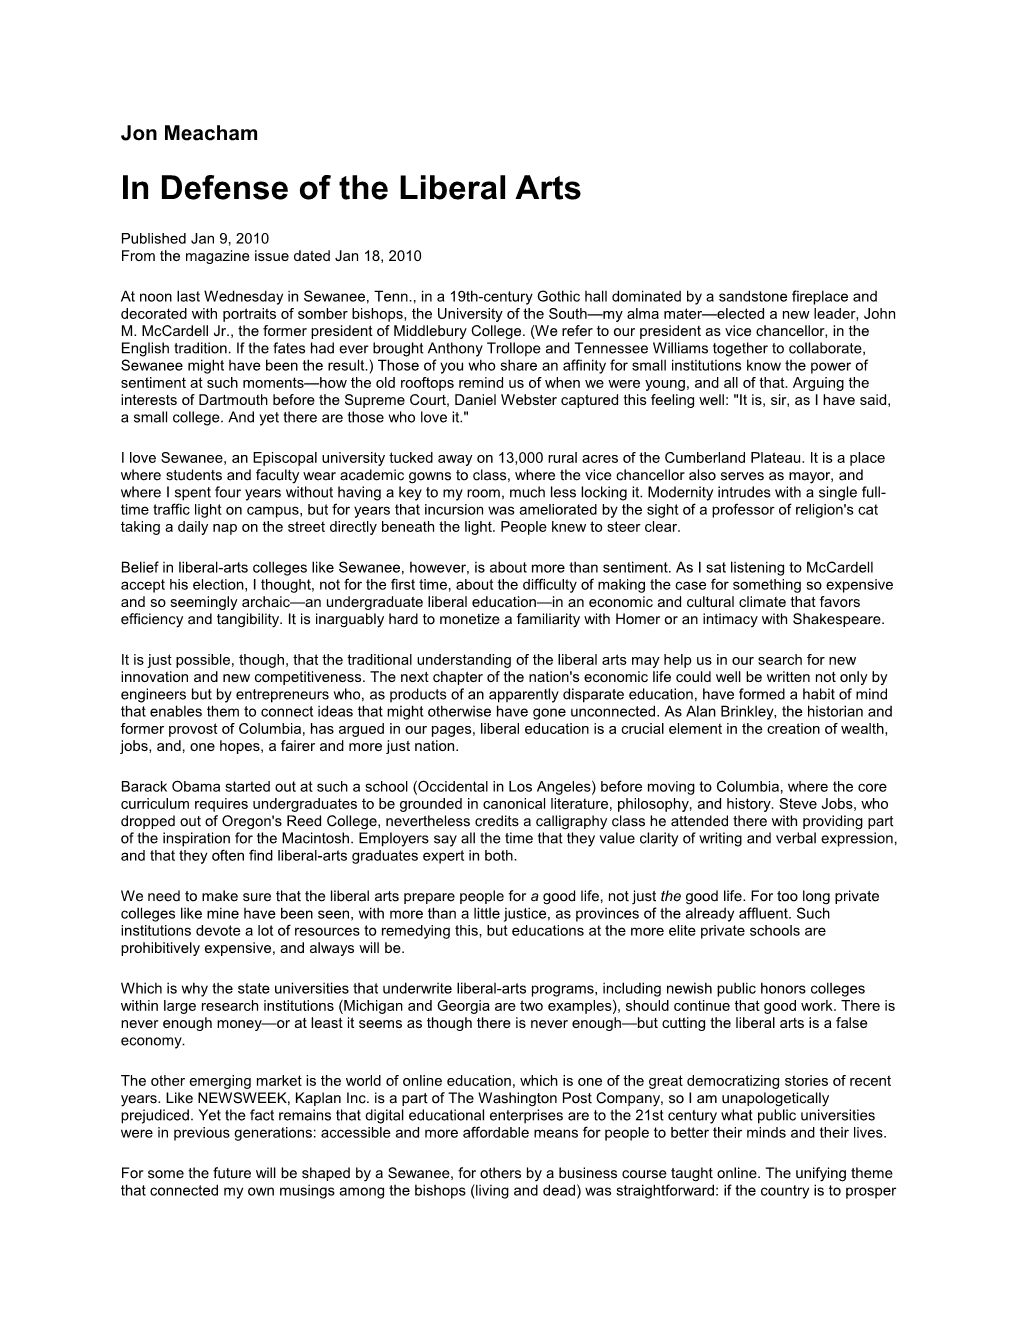 In Defense of the Liberal Arts